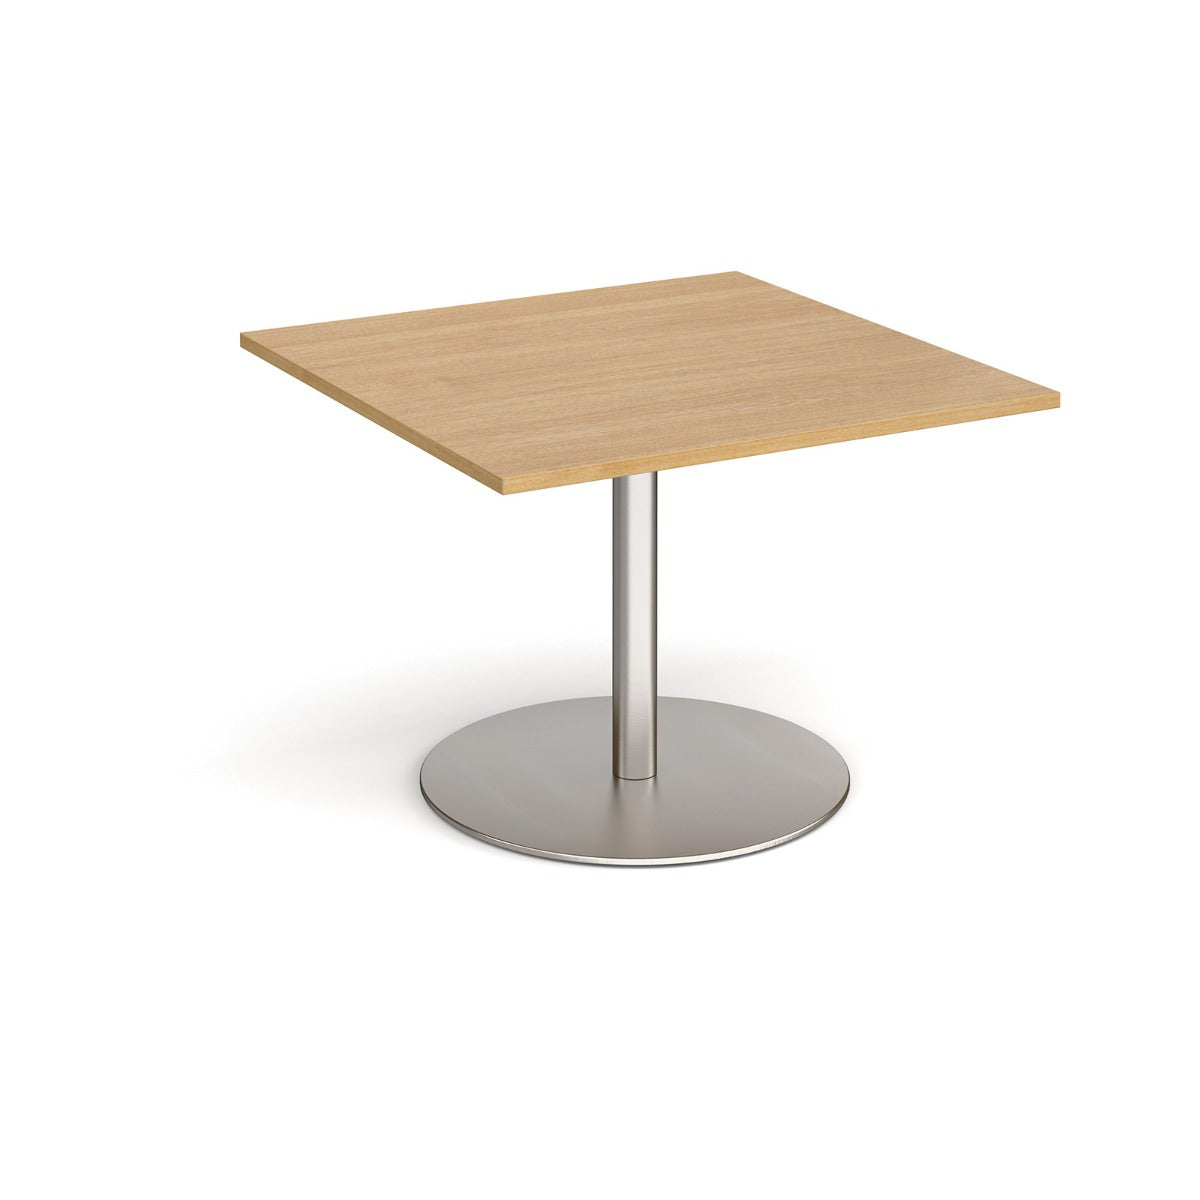 Eternal Square Extension Boardroom Meeting Table